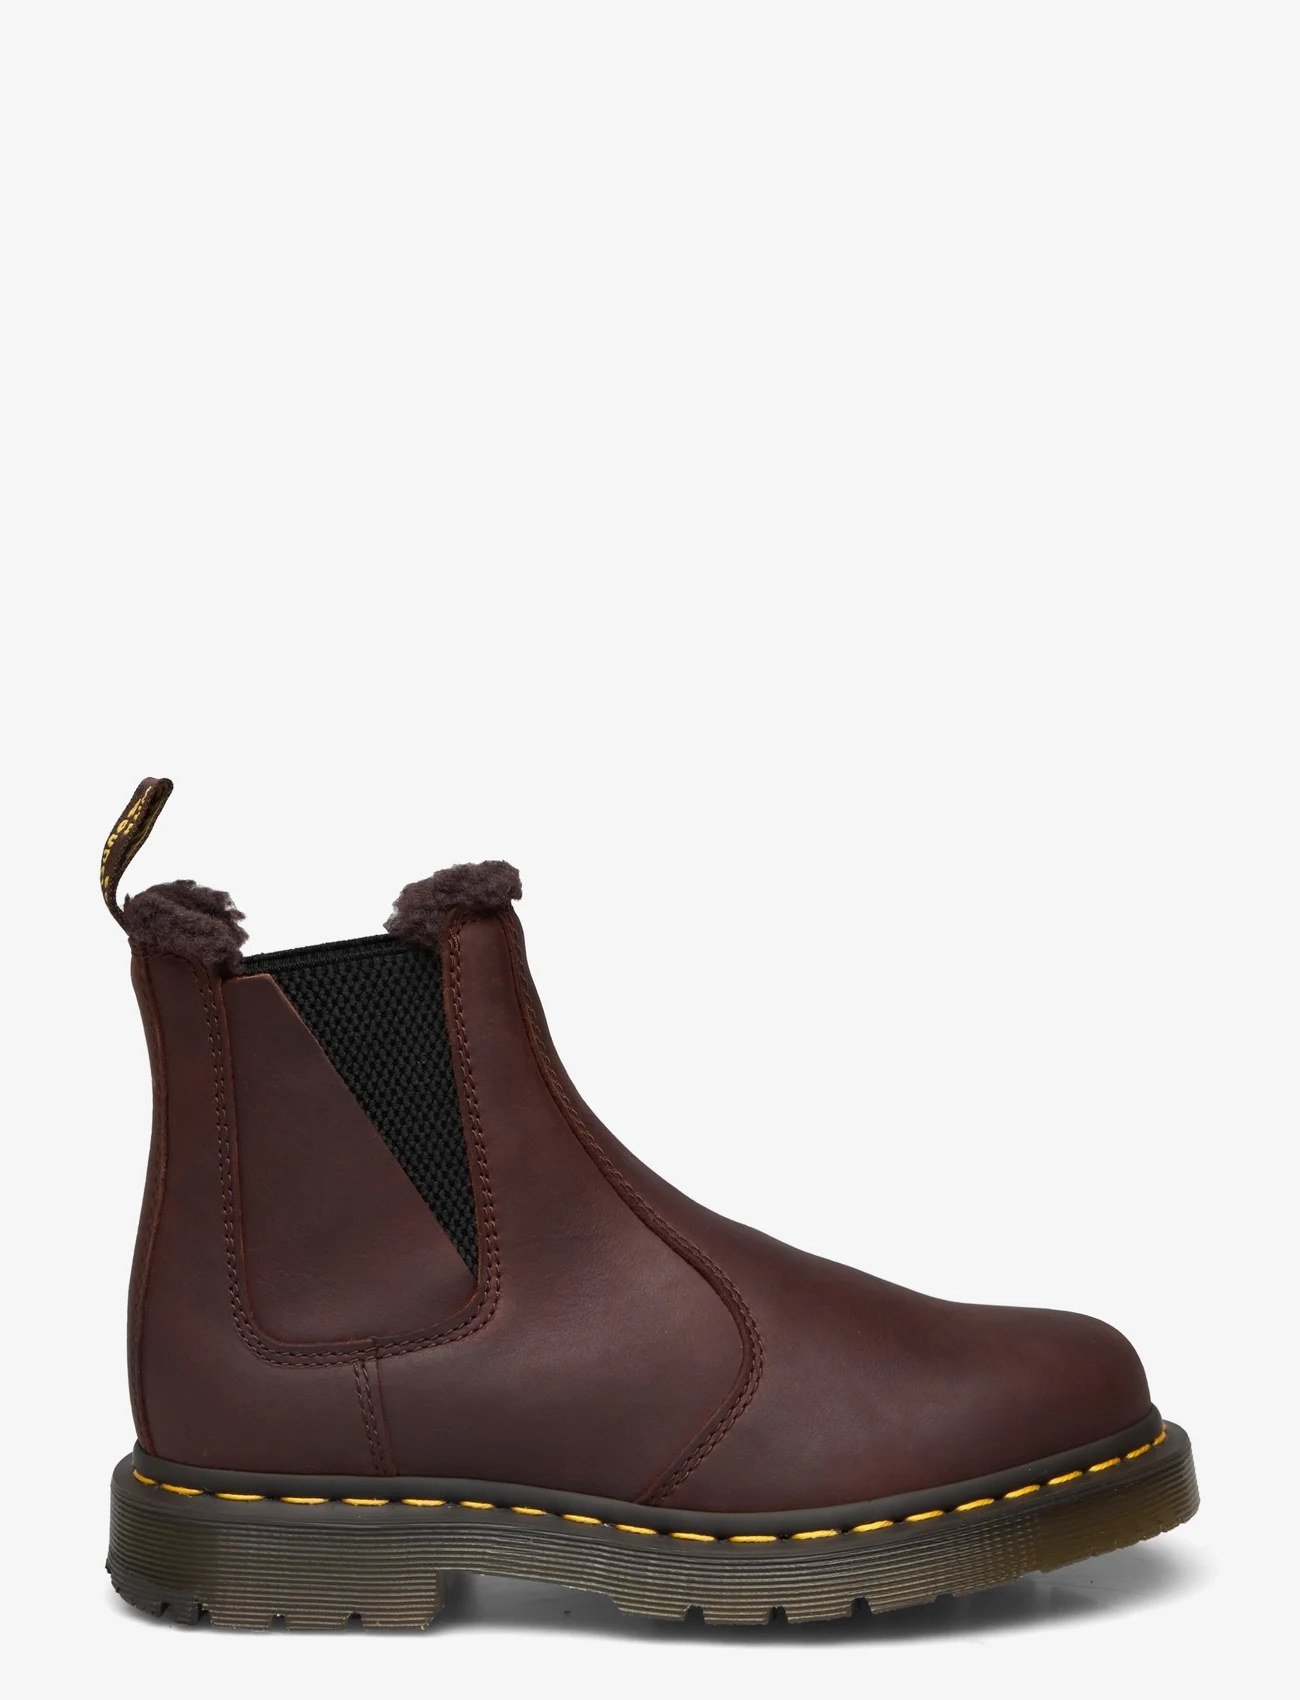 Dr. Martens - 2976 Wg Chocolate Brown Outlaw Wp - flache stiefeletten - chocolate brown - 1